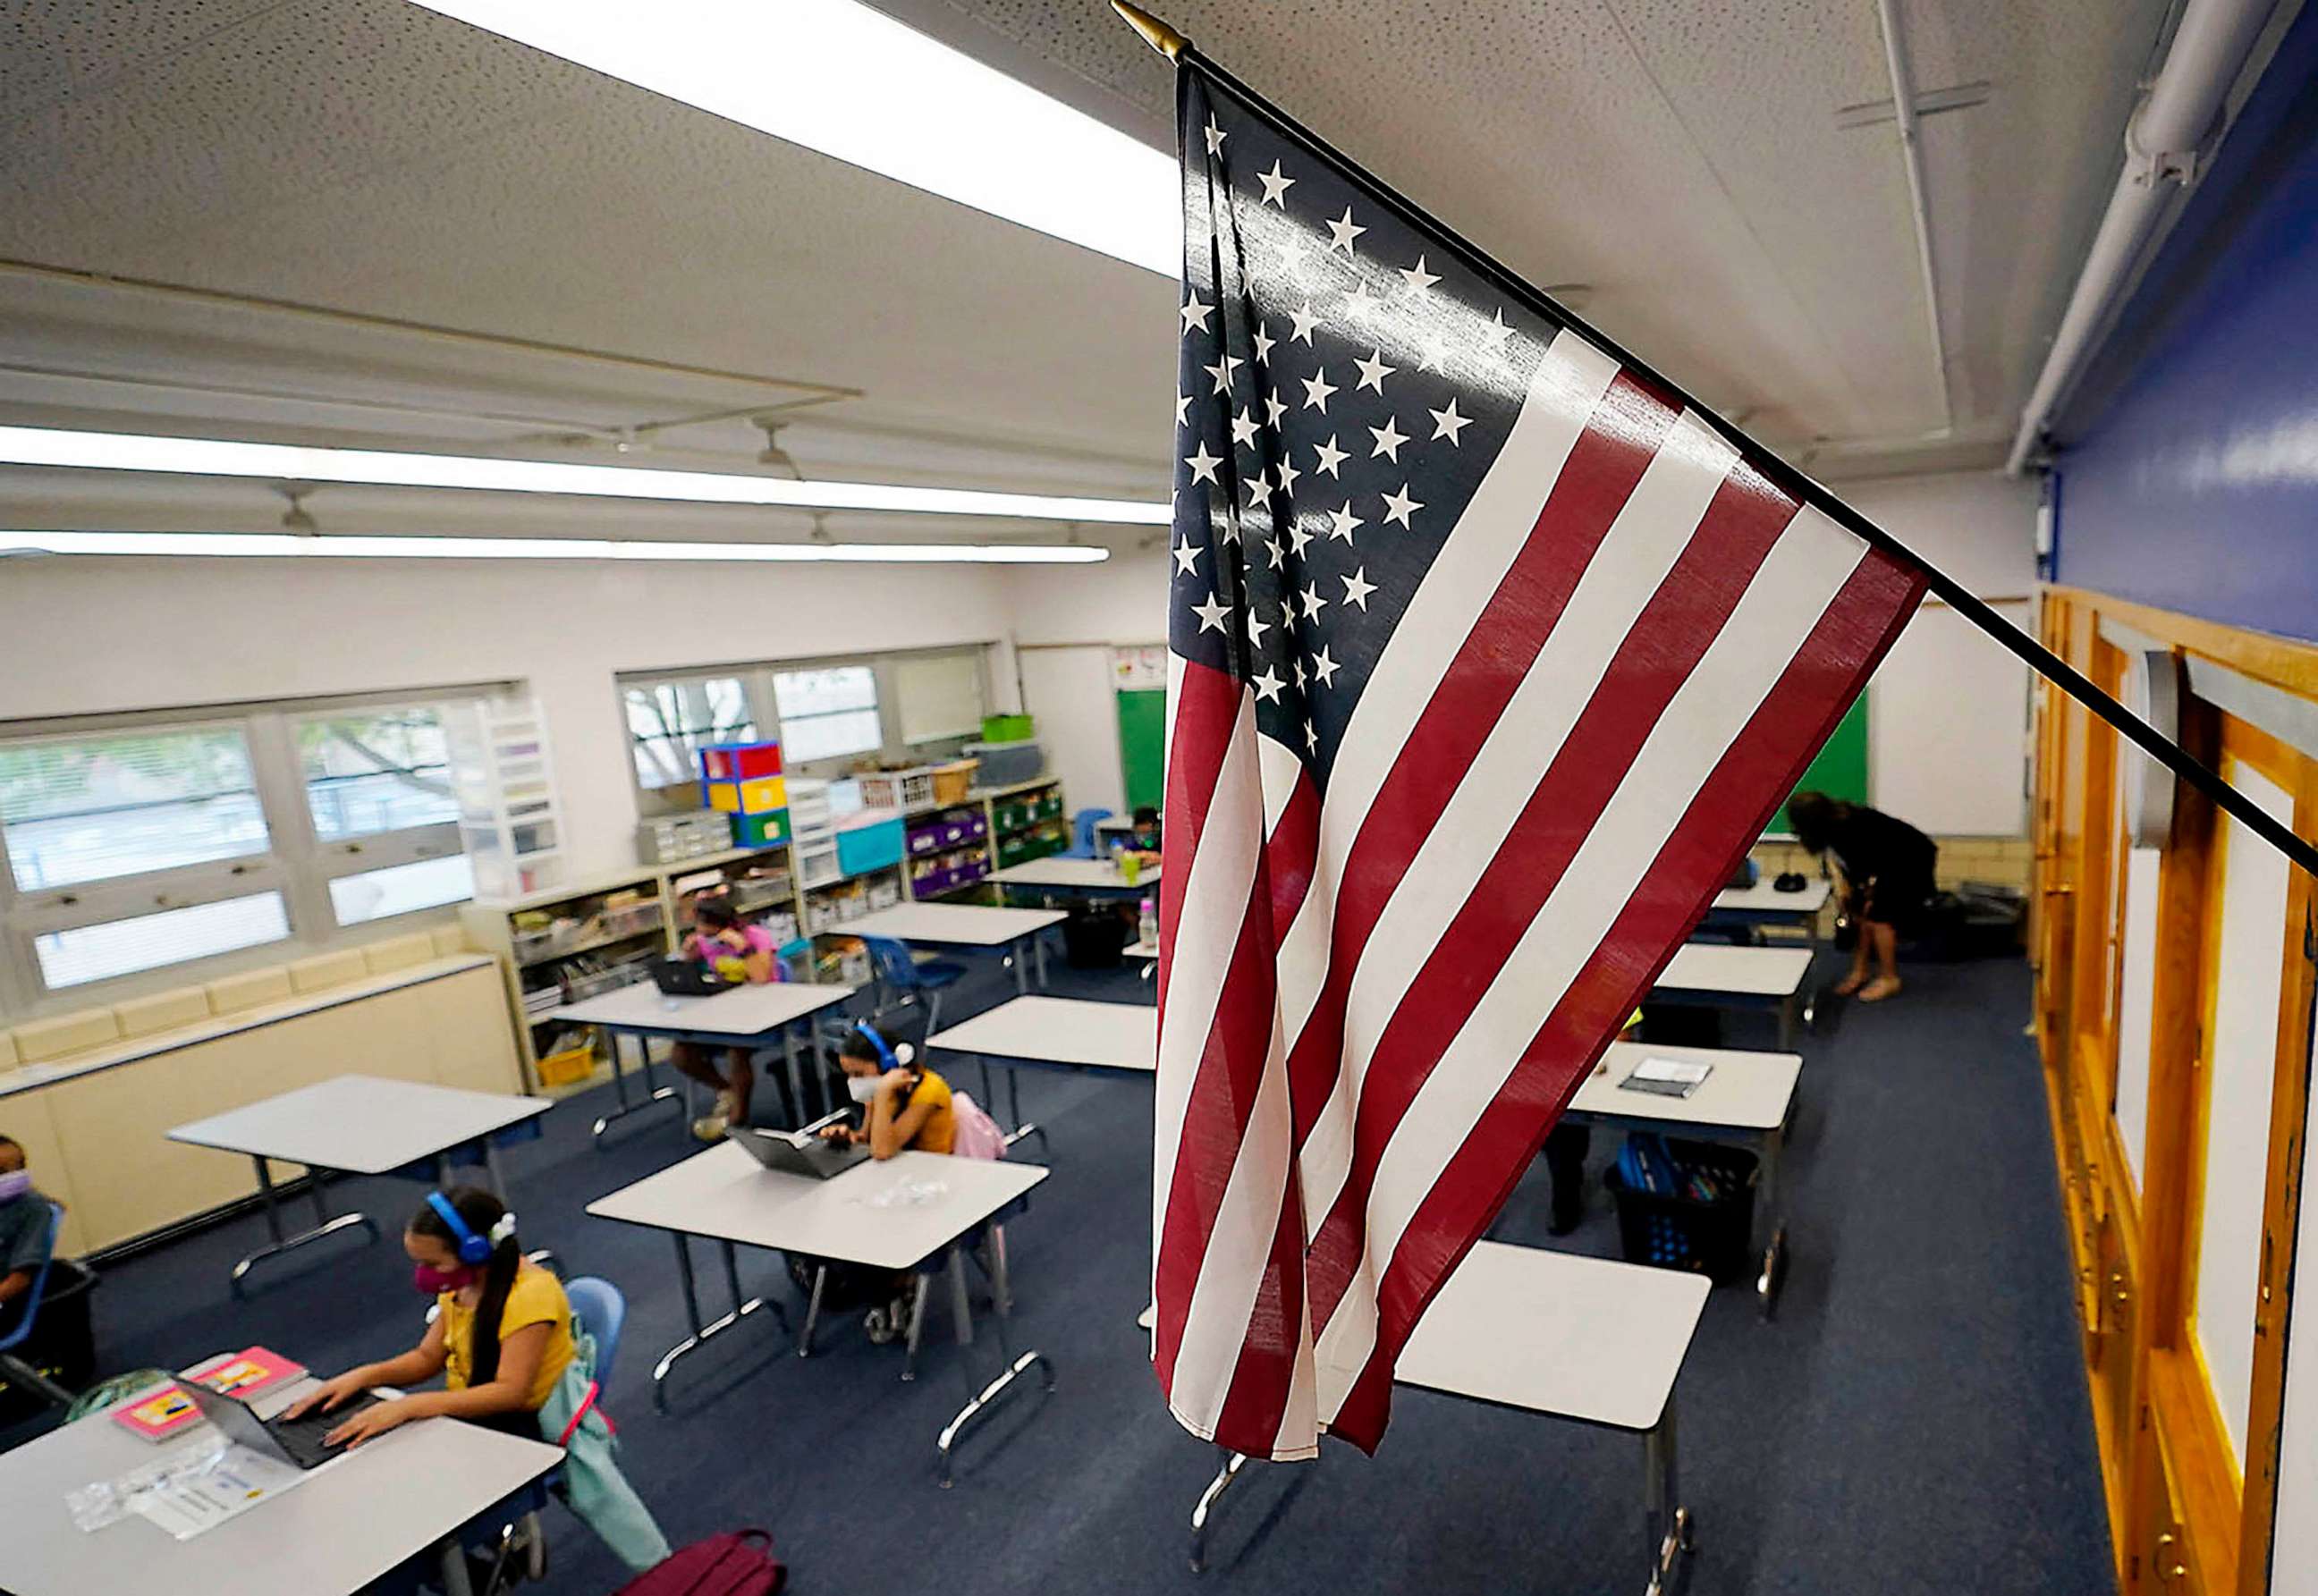 PHOTO: FILE - An American flag hangs in a classroom as students work on laptops in Newlon Elementary School, Aug. 25, 2020 in Denver.